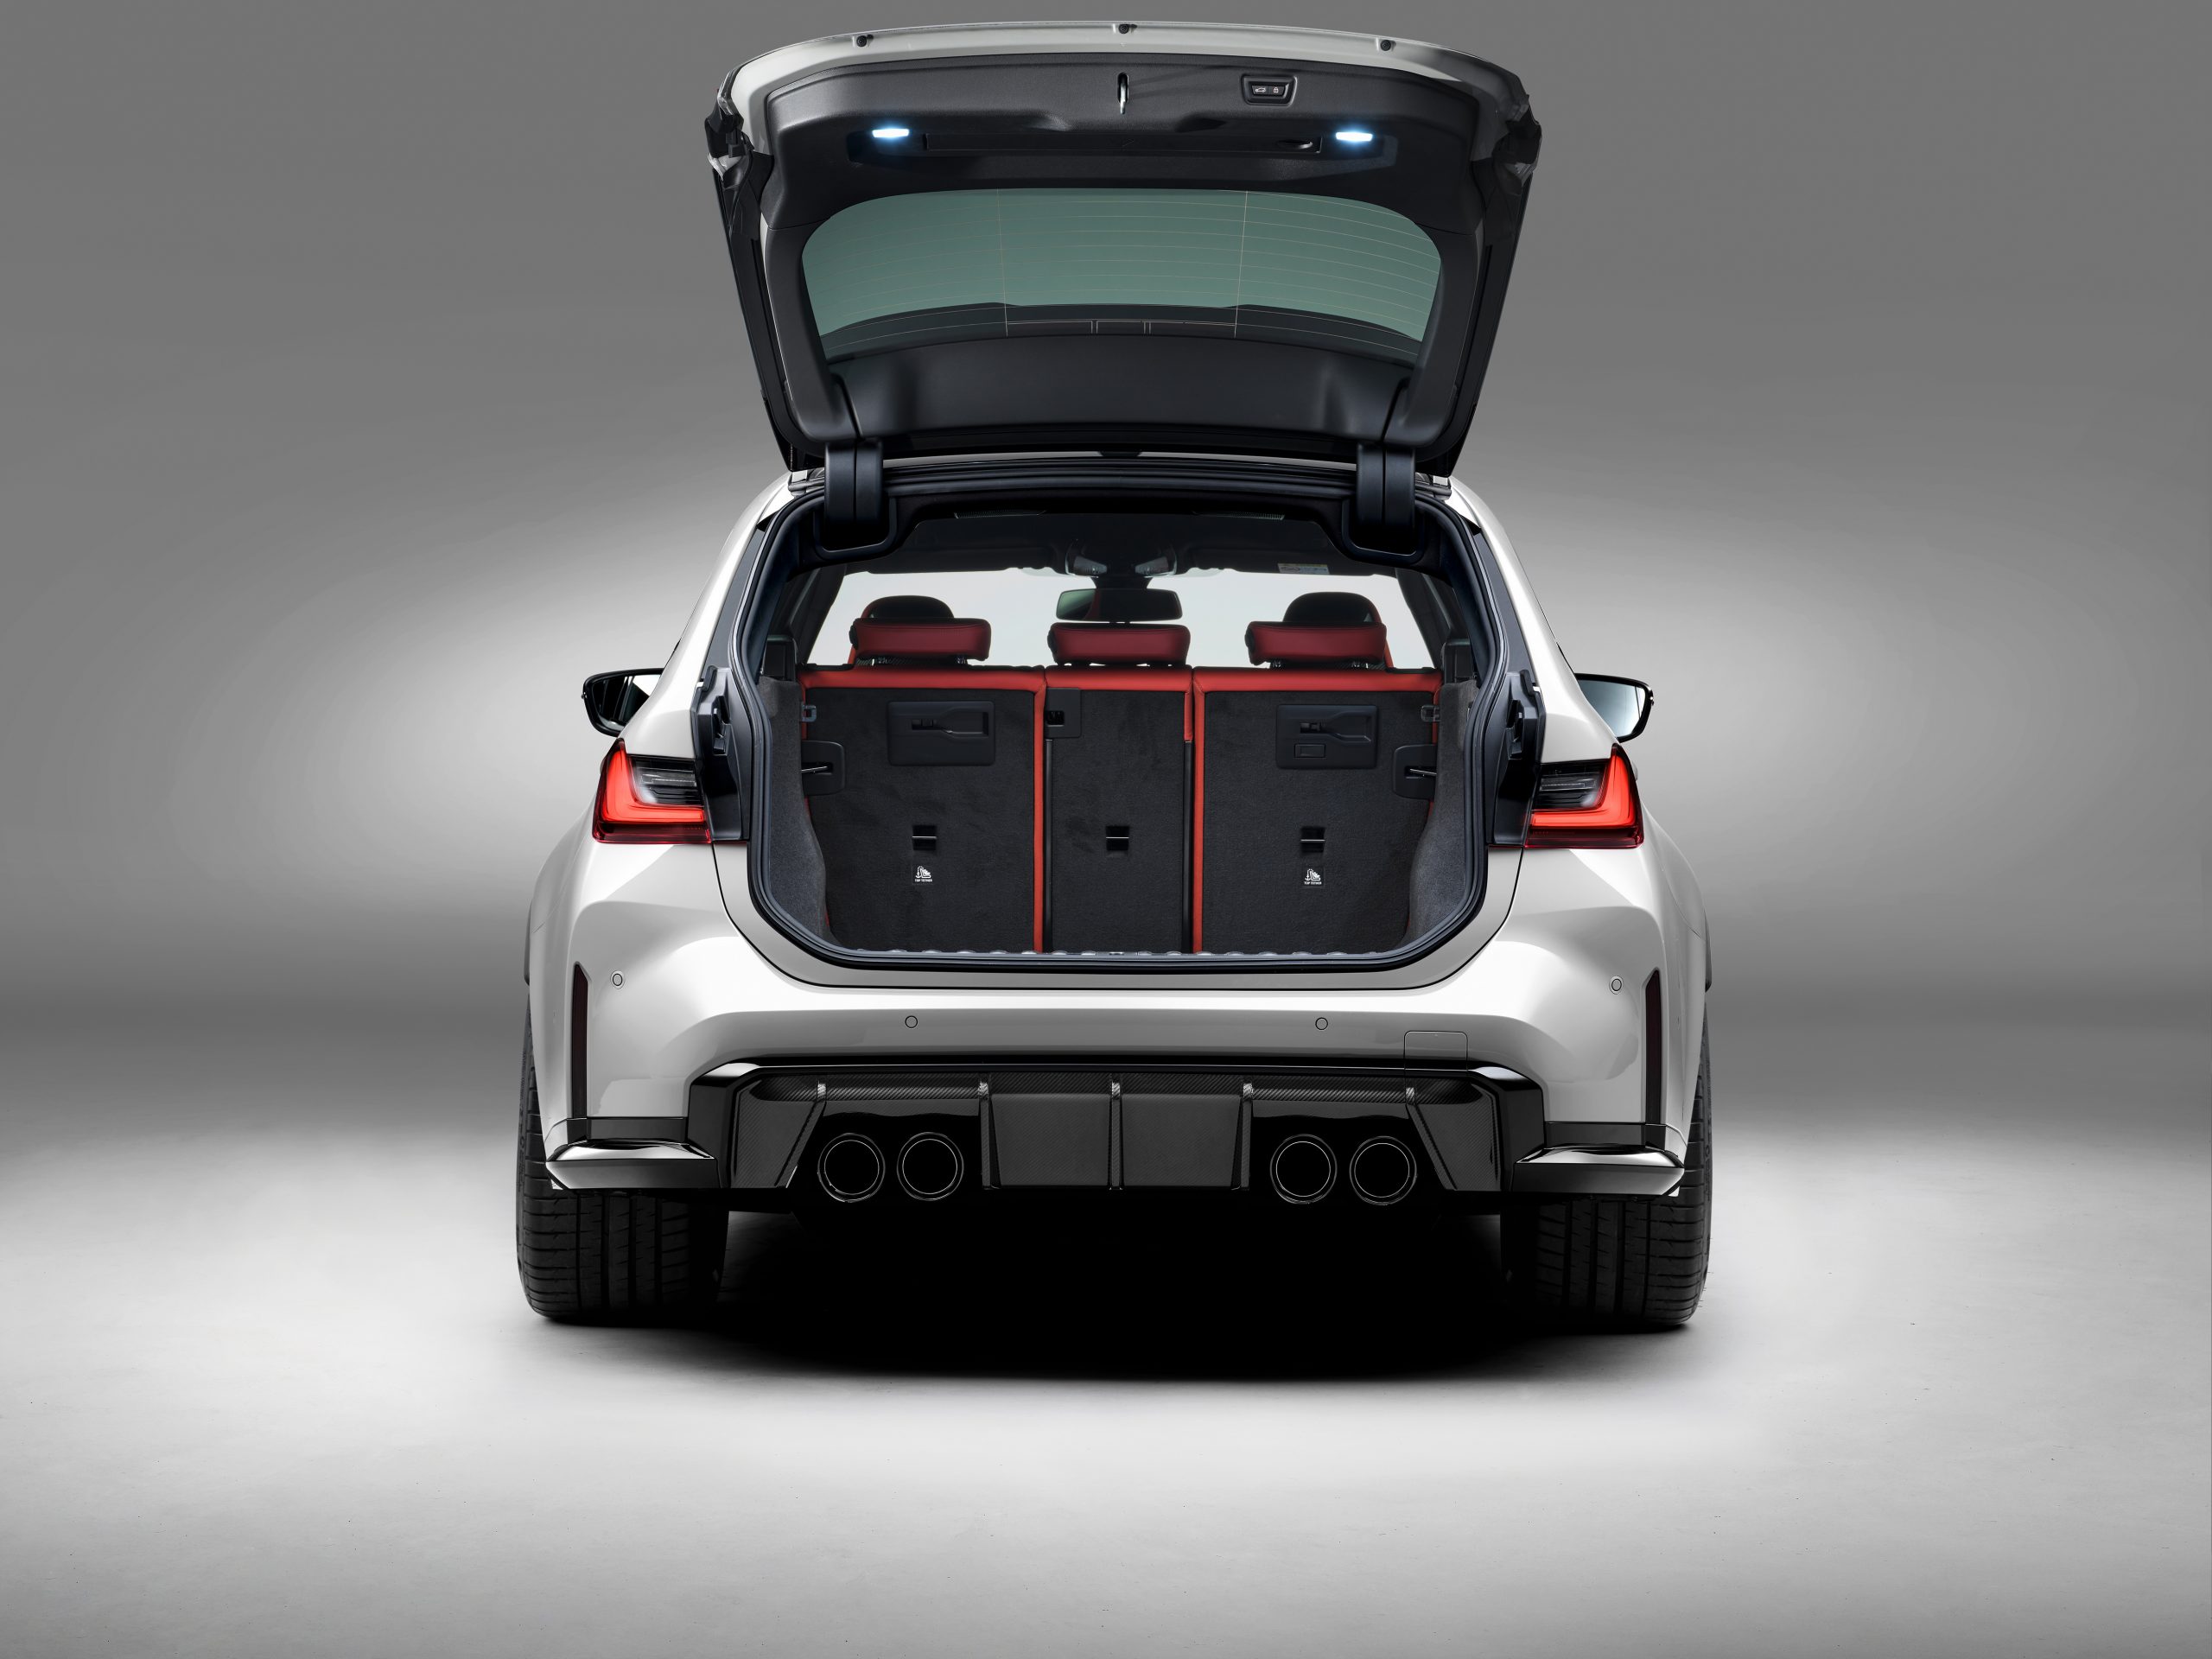 The BMW M3 Touring has 500 litre boot